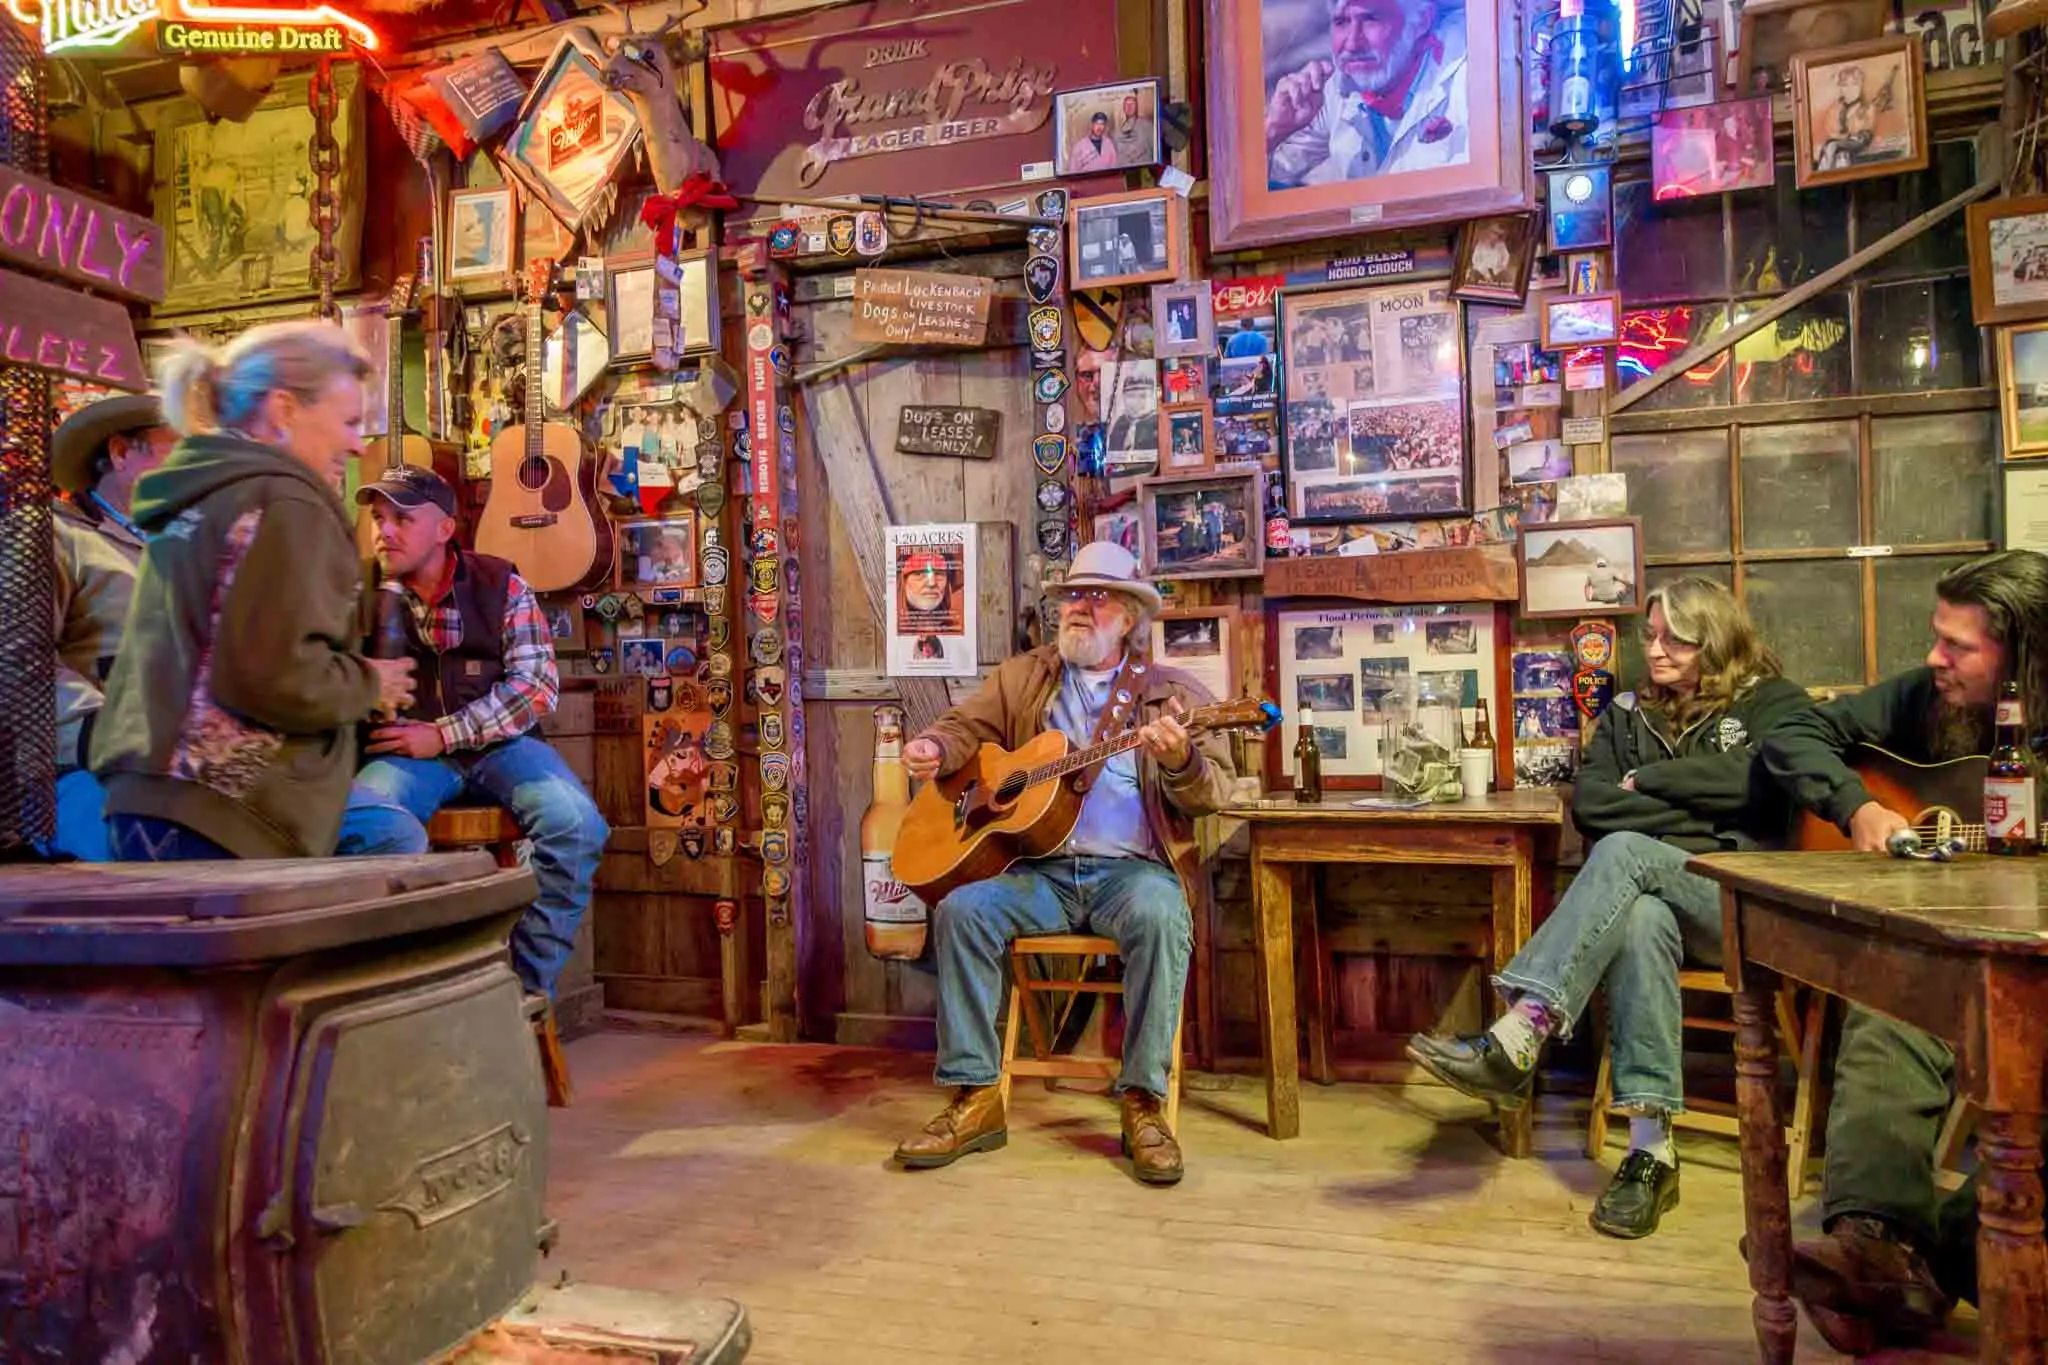 People watching a man play guitar in a bar with walls covered in memorabilia.